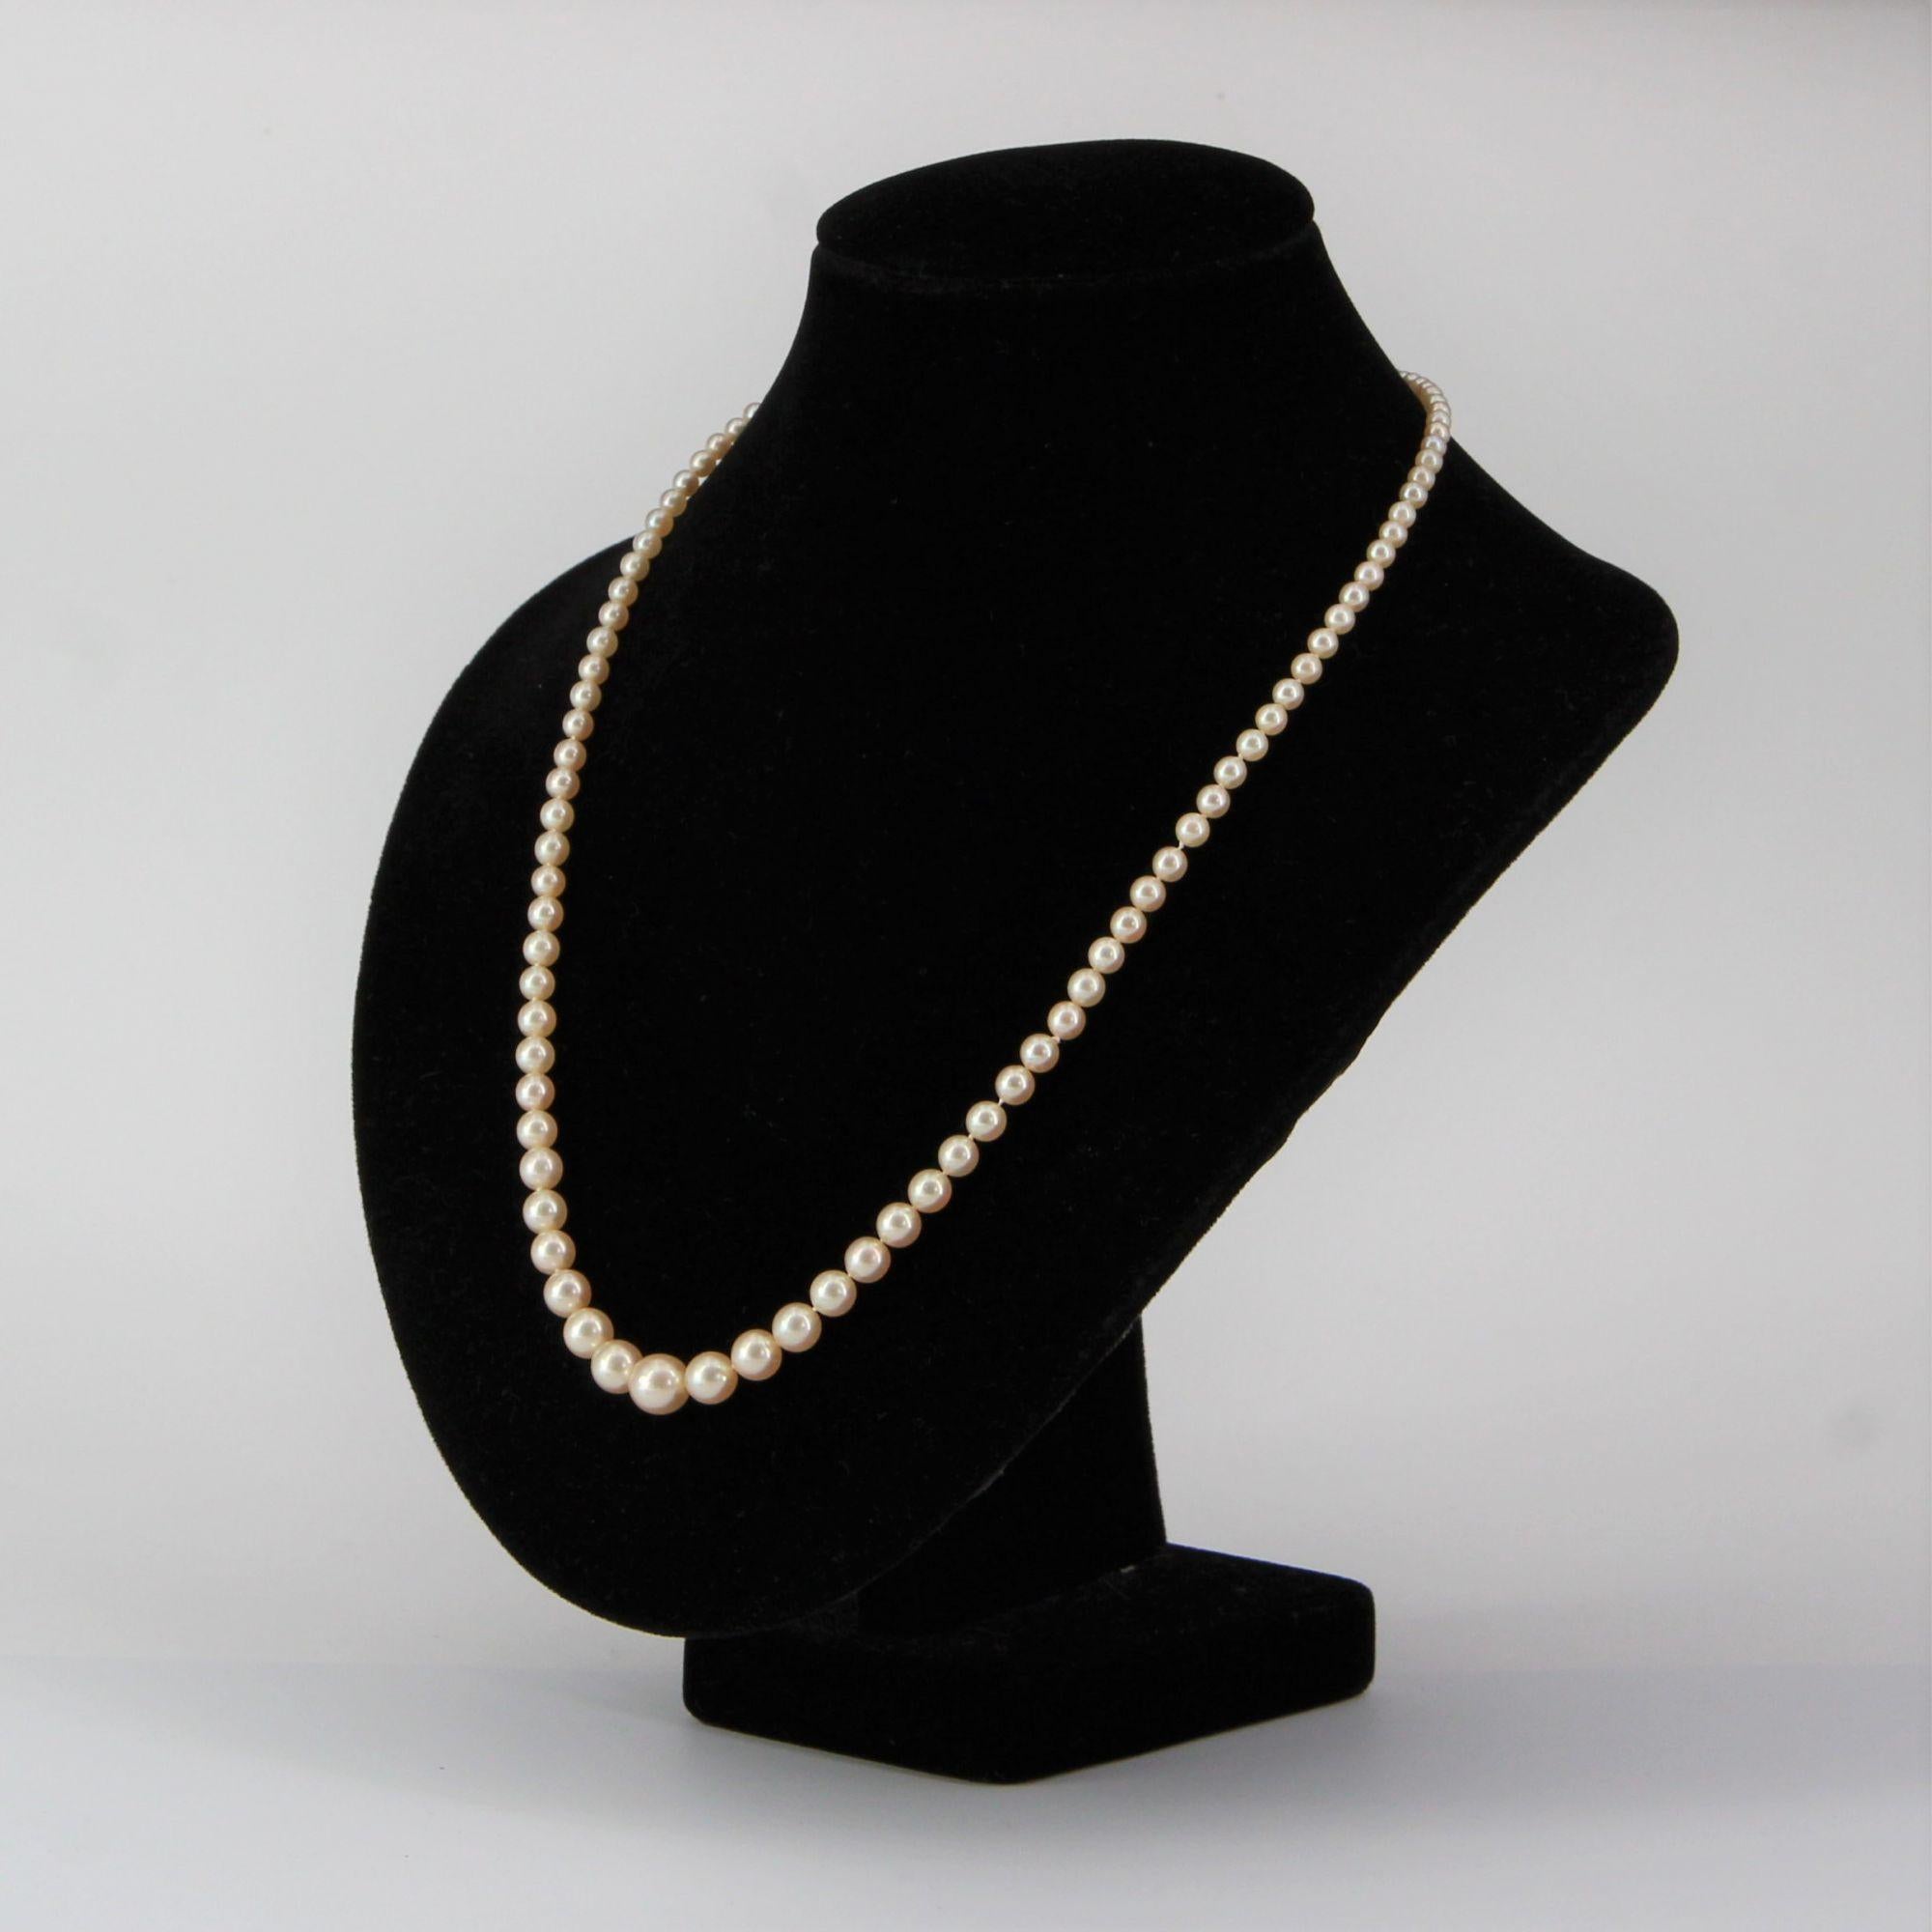 1950's pearl necklace value